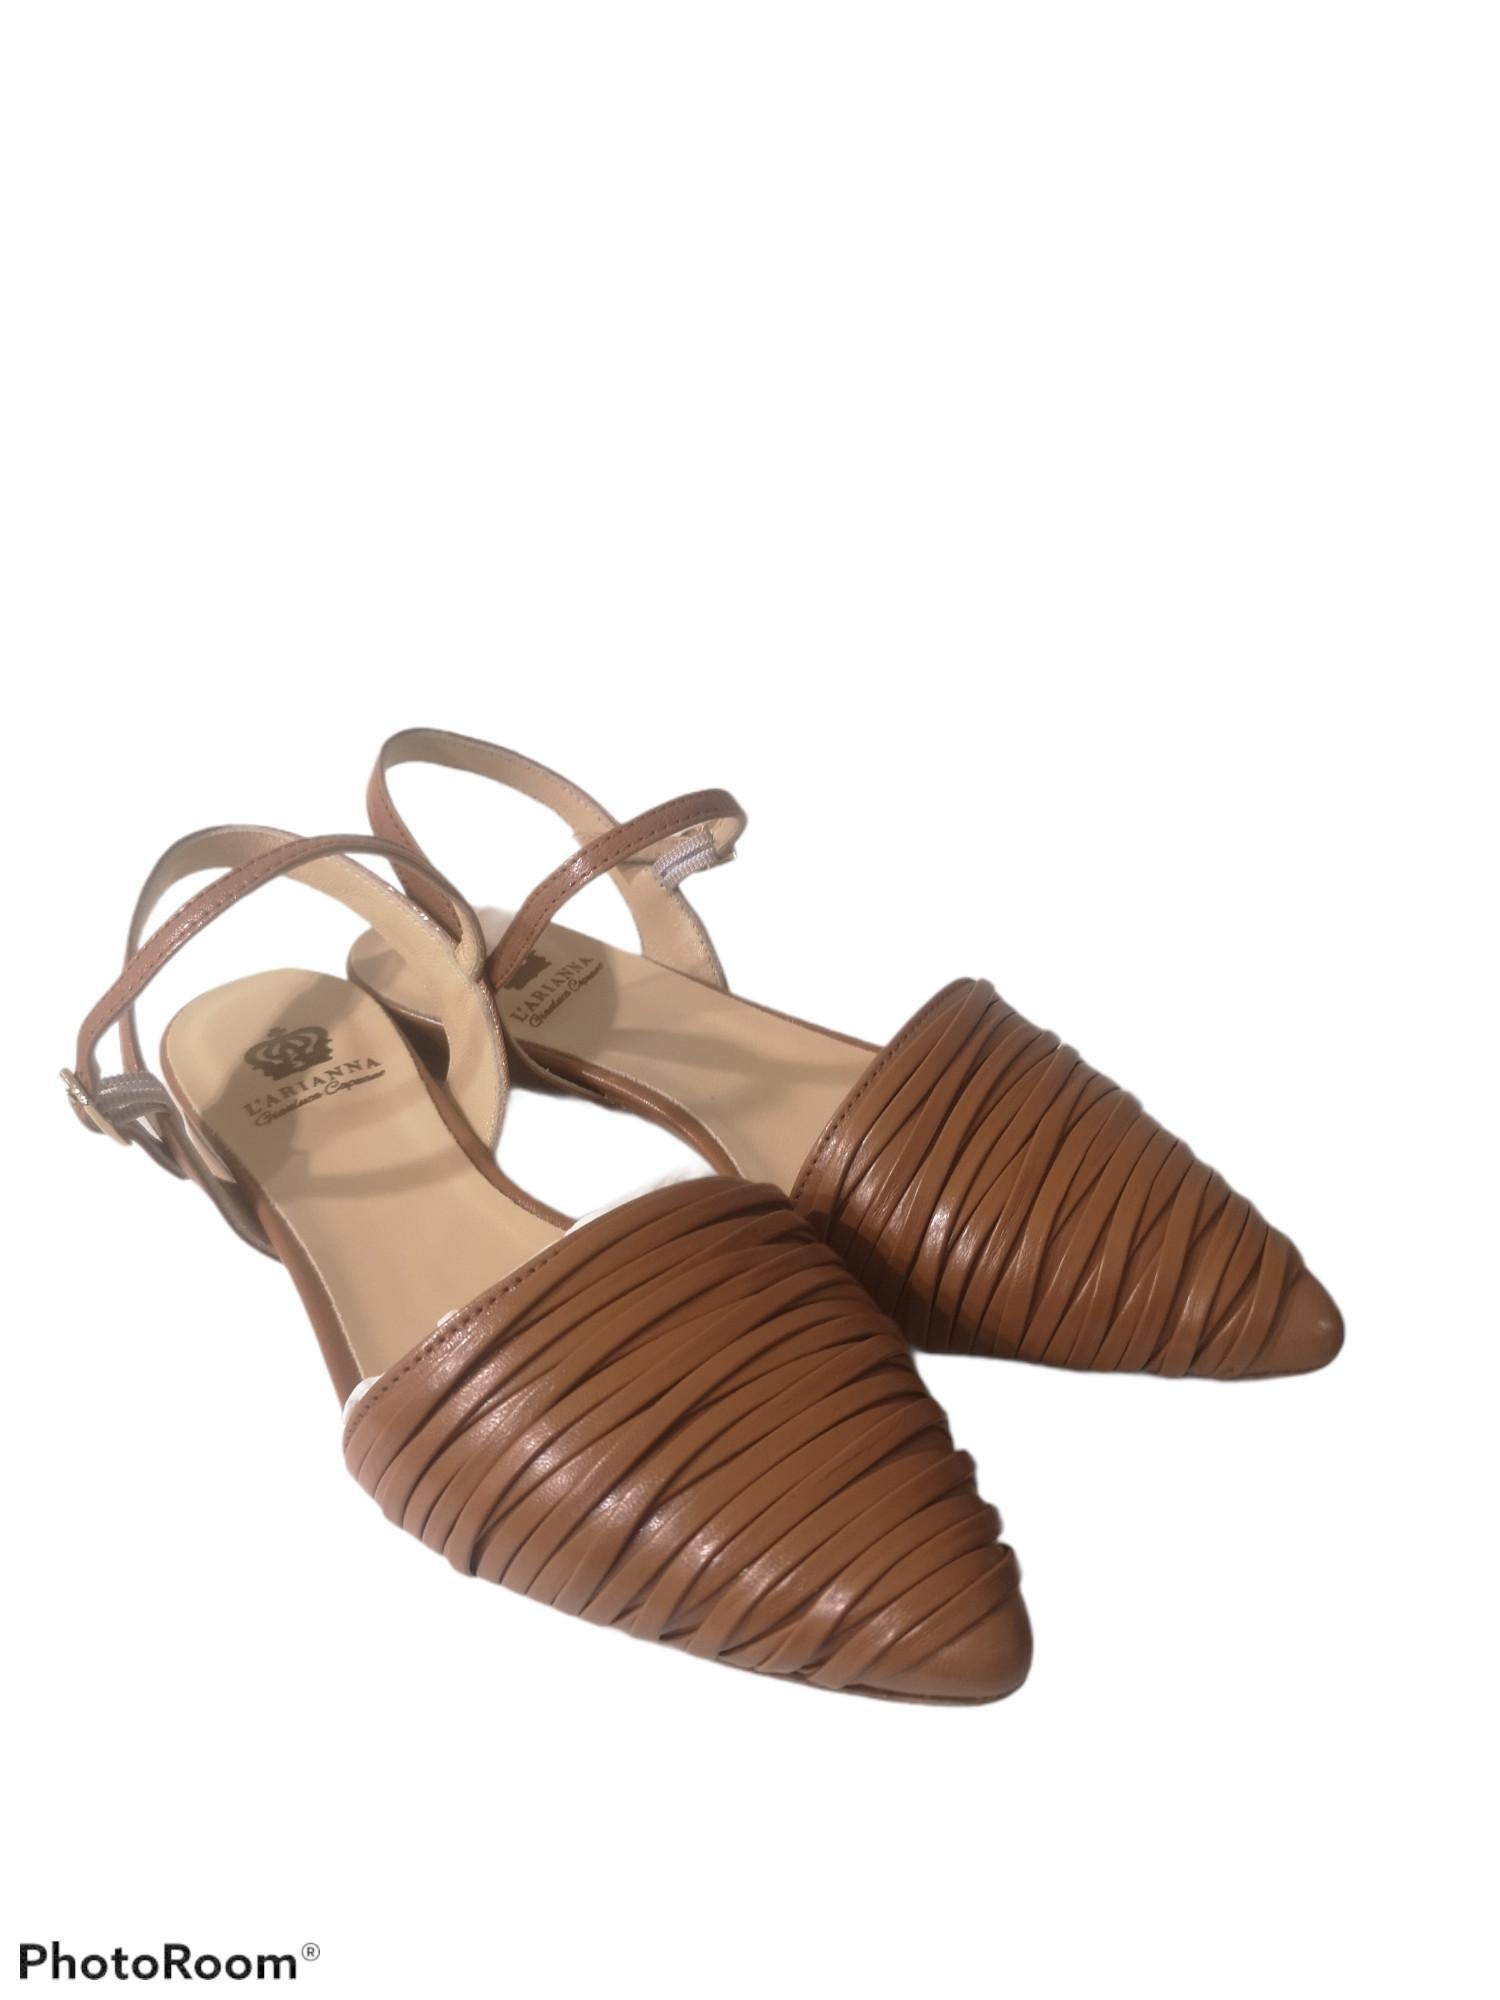 Handmade brown leather sandals - ballerinas
totally made in italy 
size available 36 to 40 it
